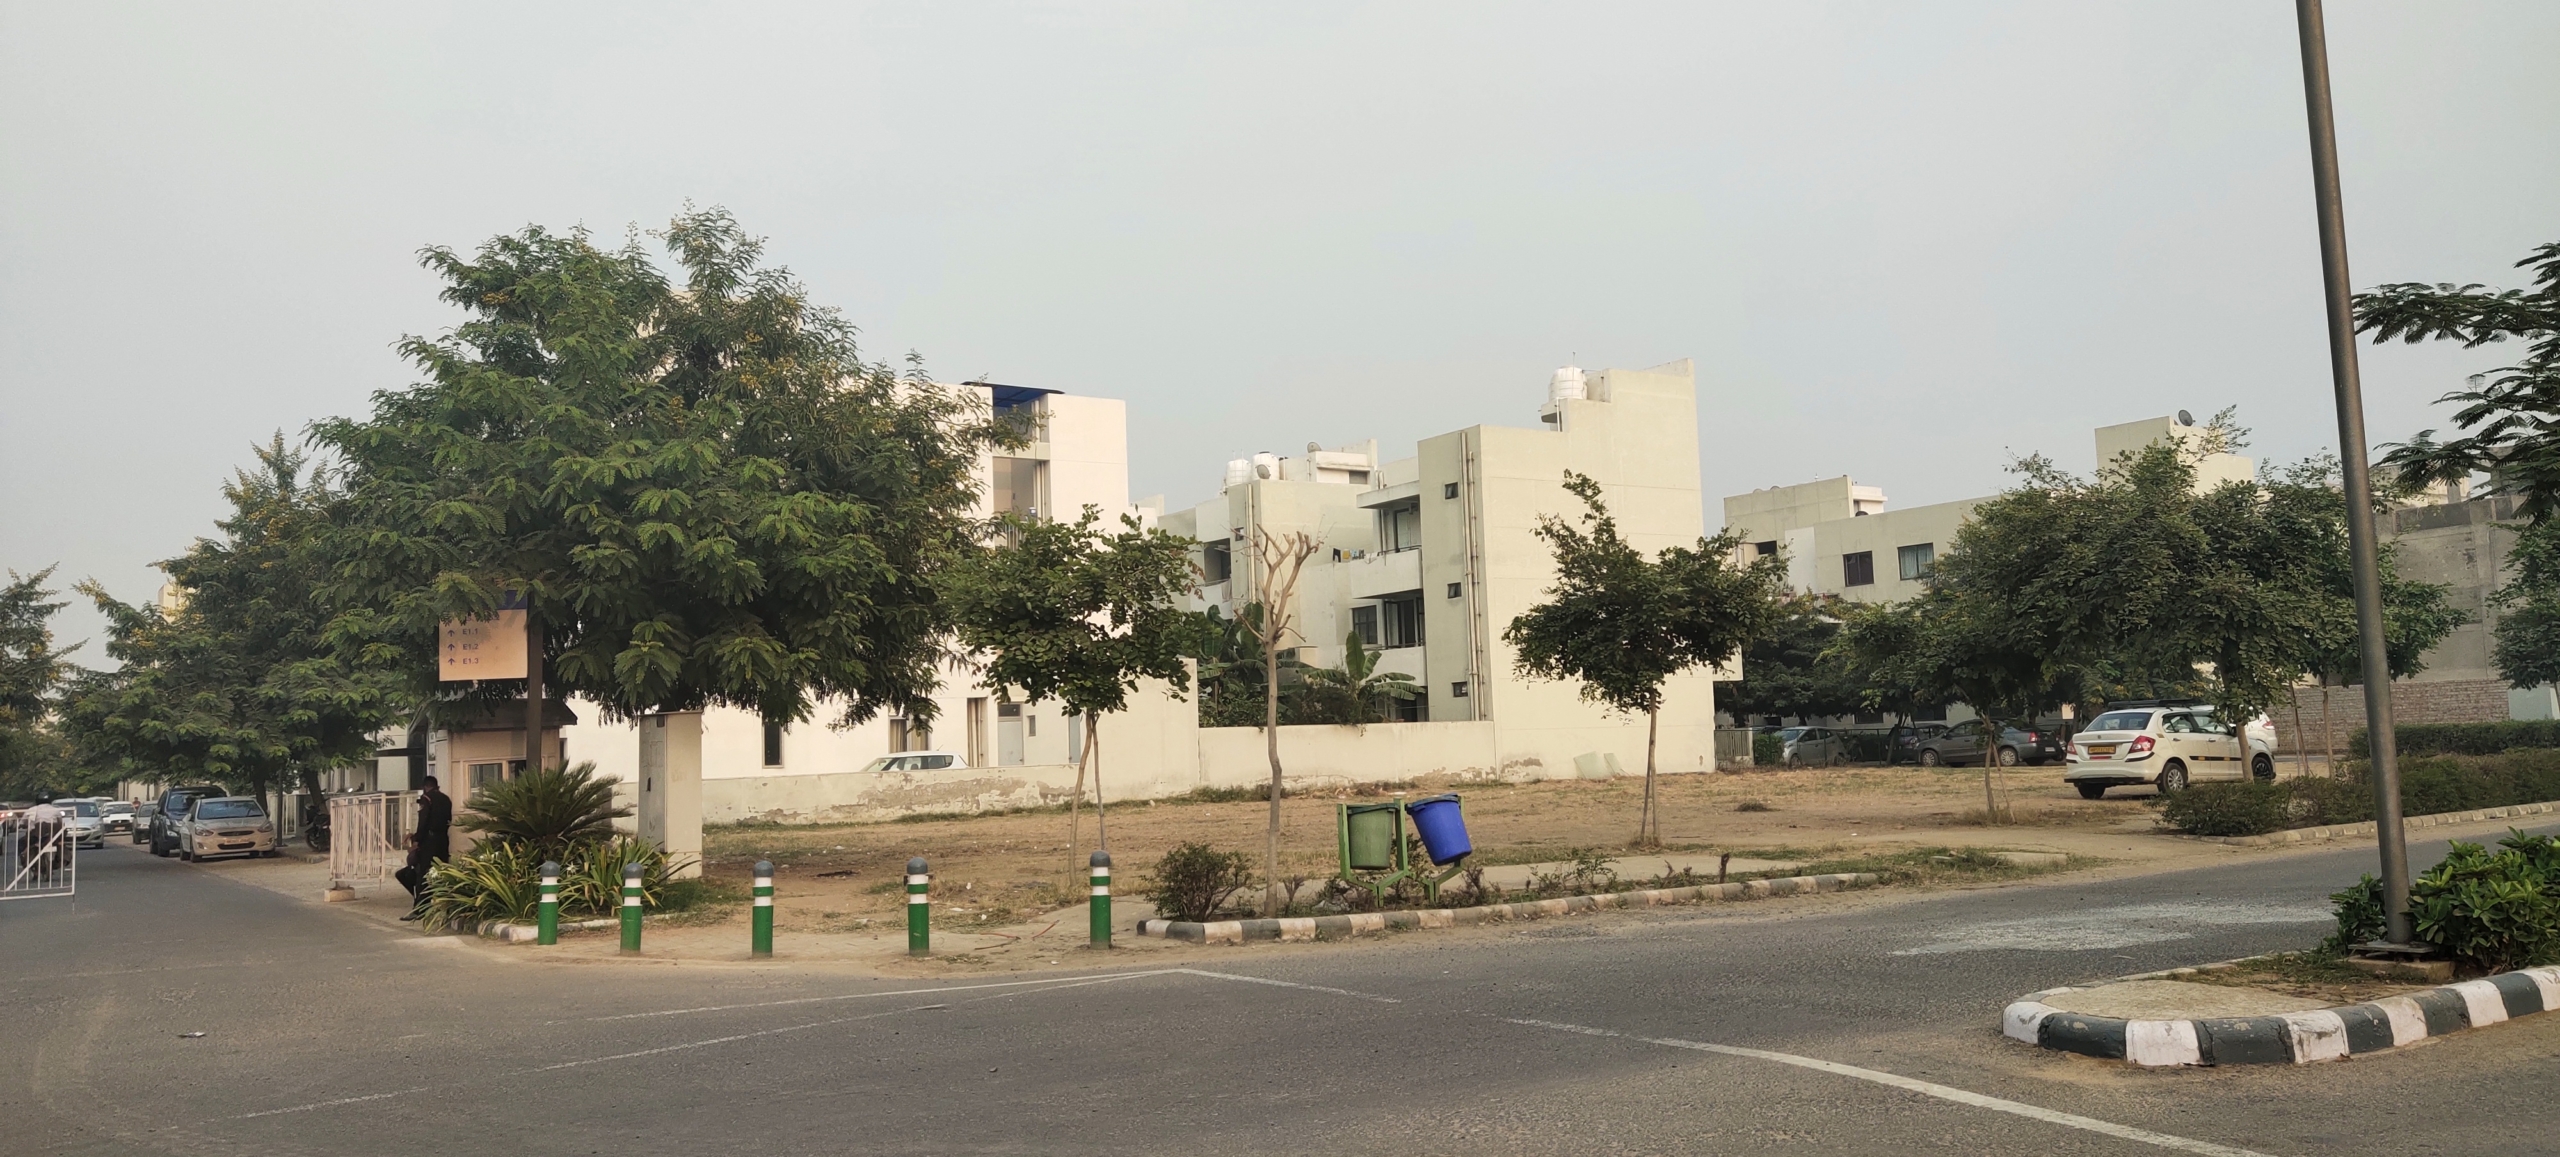 Residential Land Plots Site for sale in gurgaon